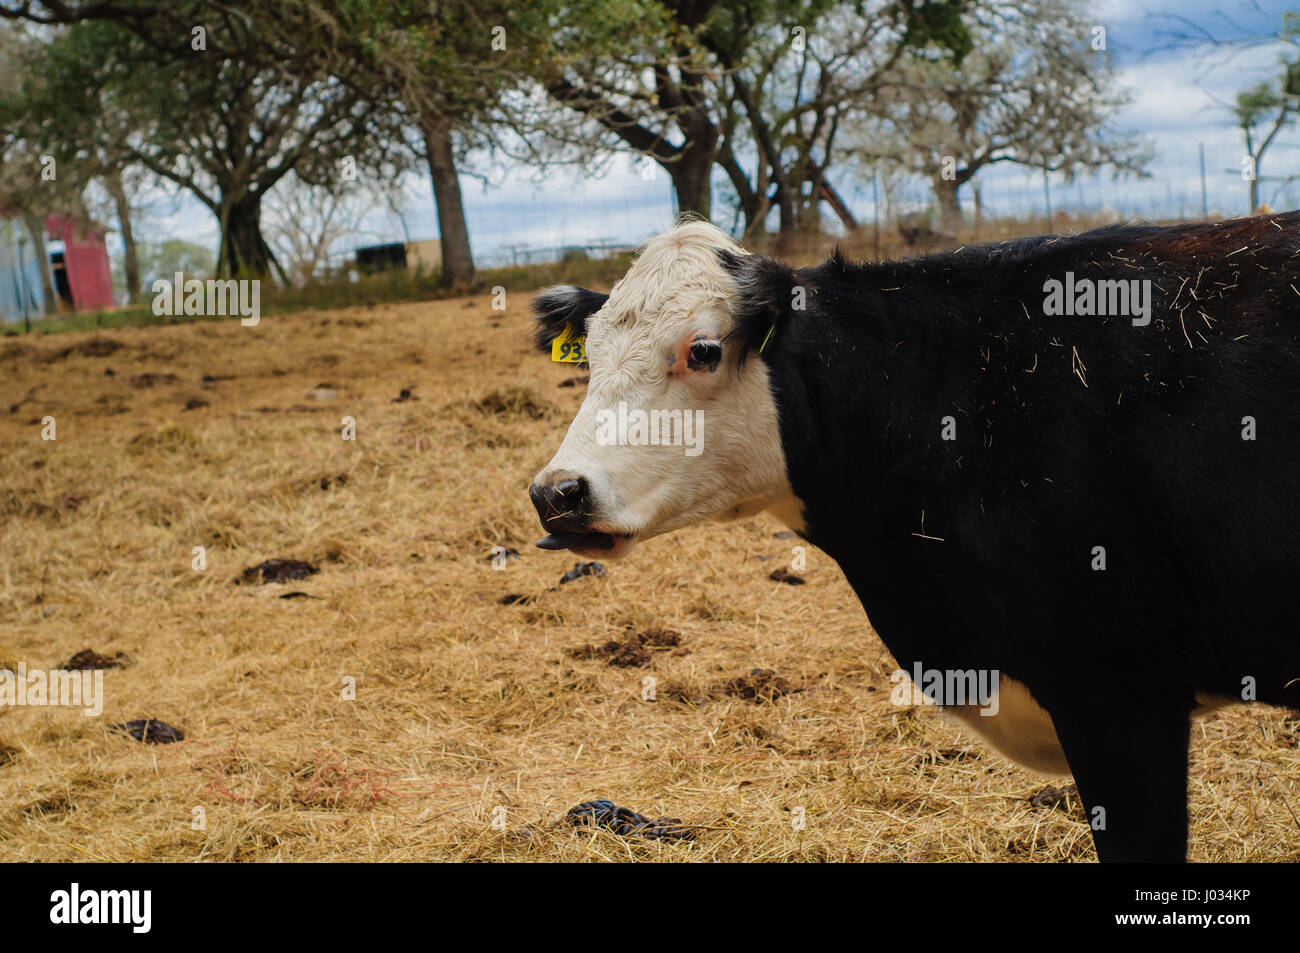 Black and white cow in hay field in Texas Stock Photo